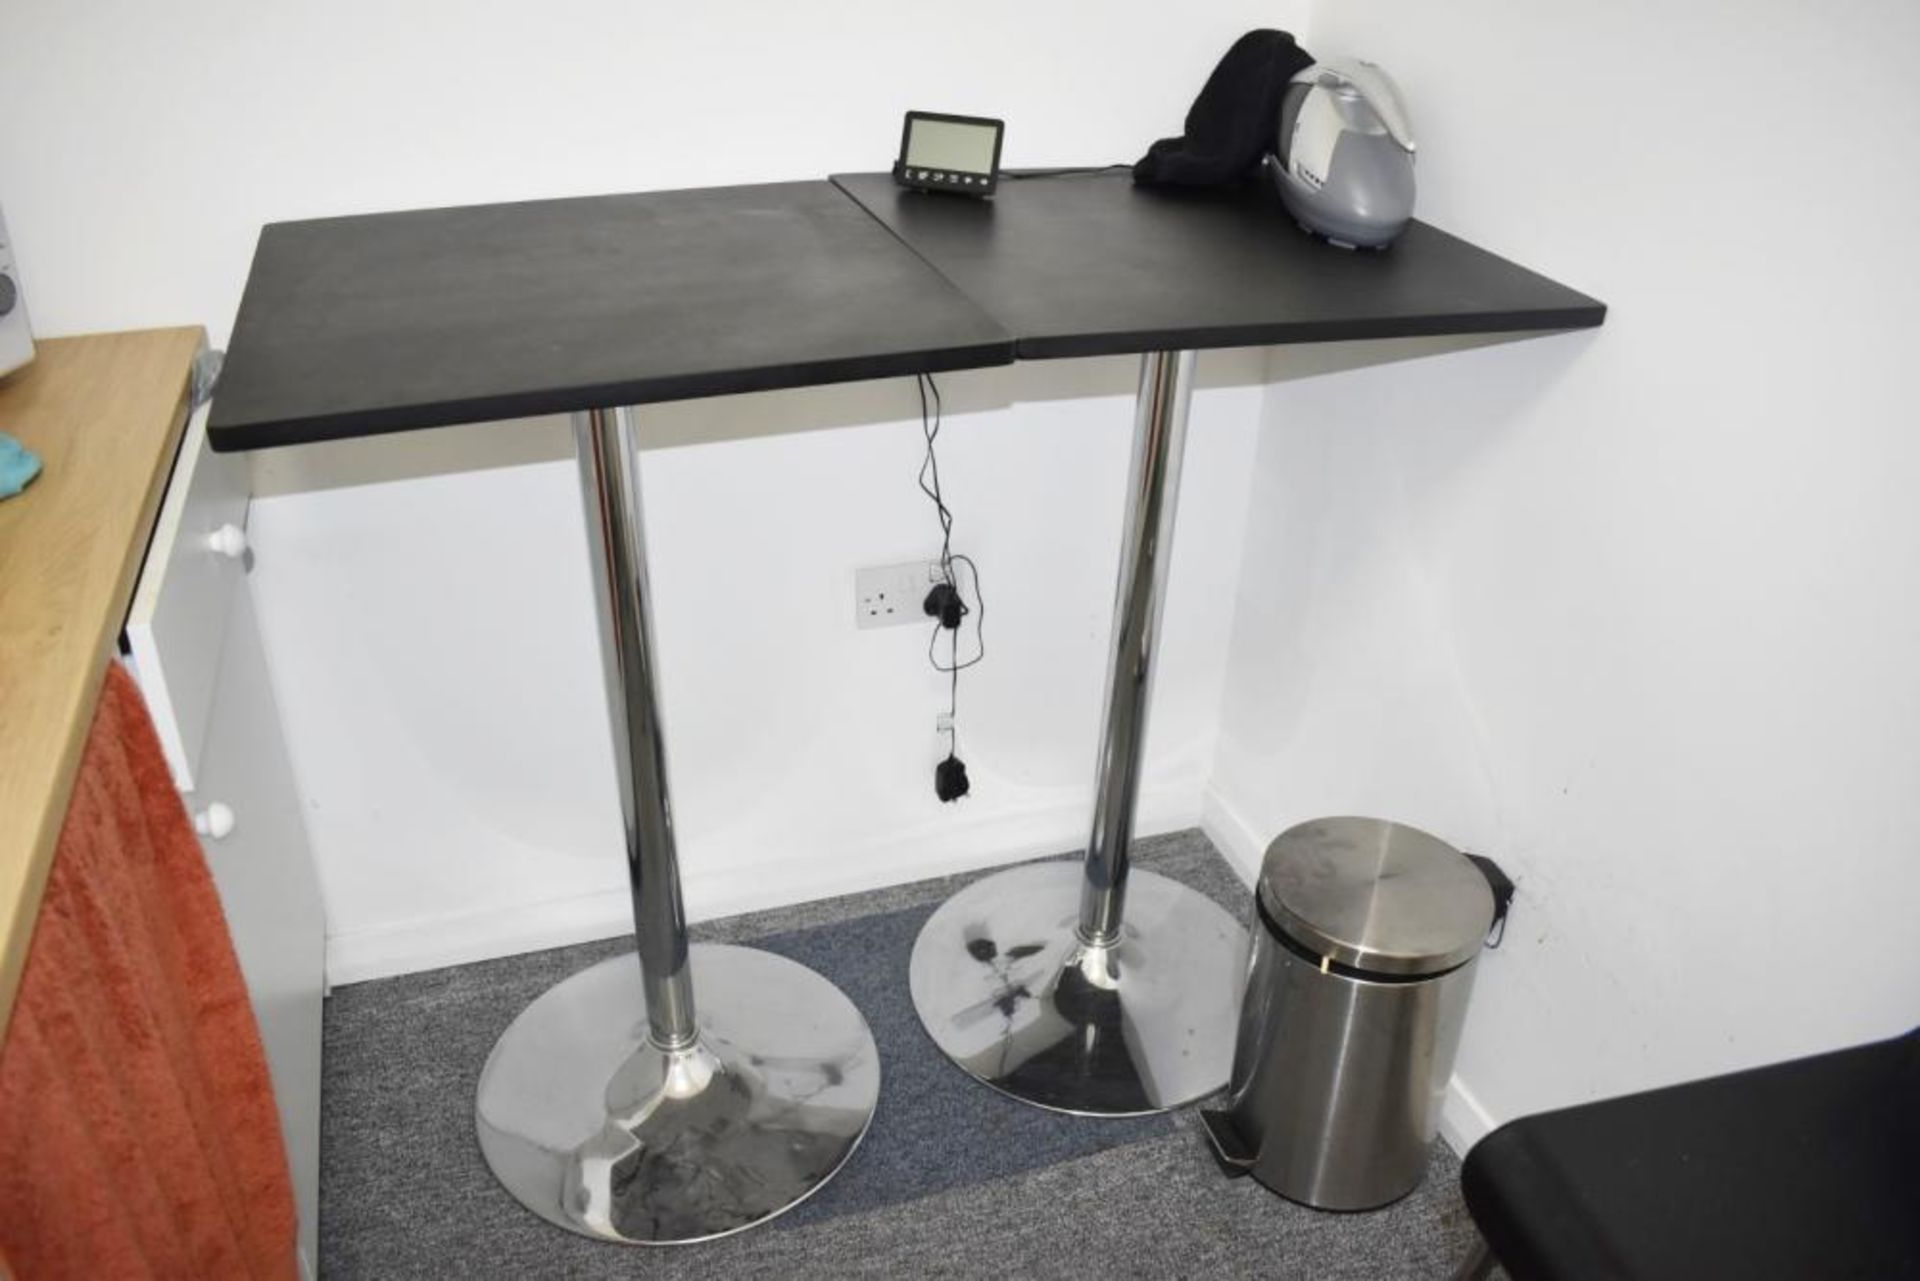 3 x Poser Tables and Two Bar Stools - Finished in Black With Chrome Bases - CL489 - Location: